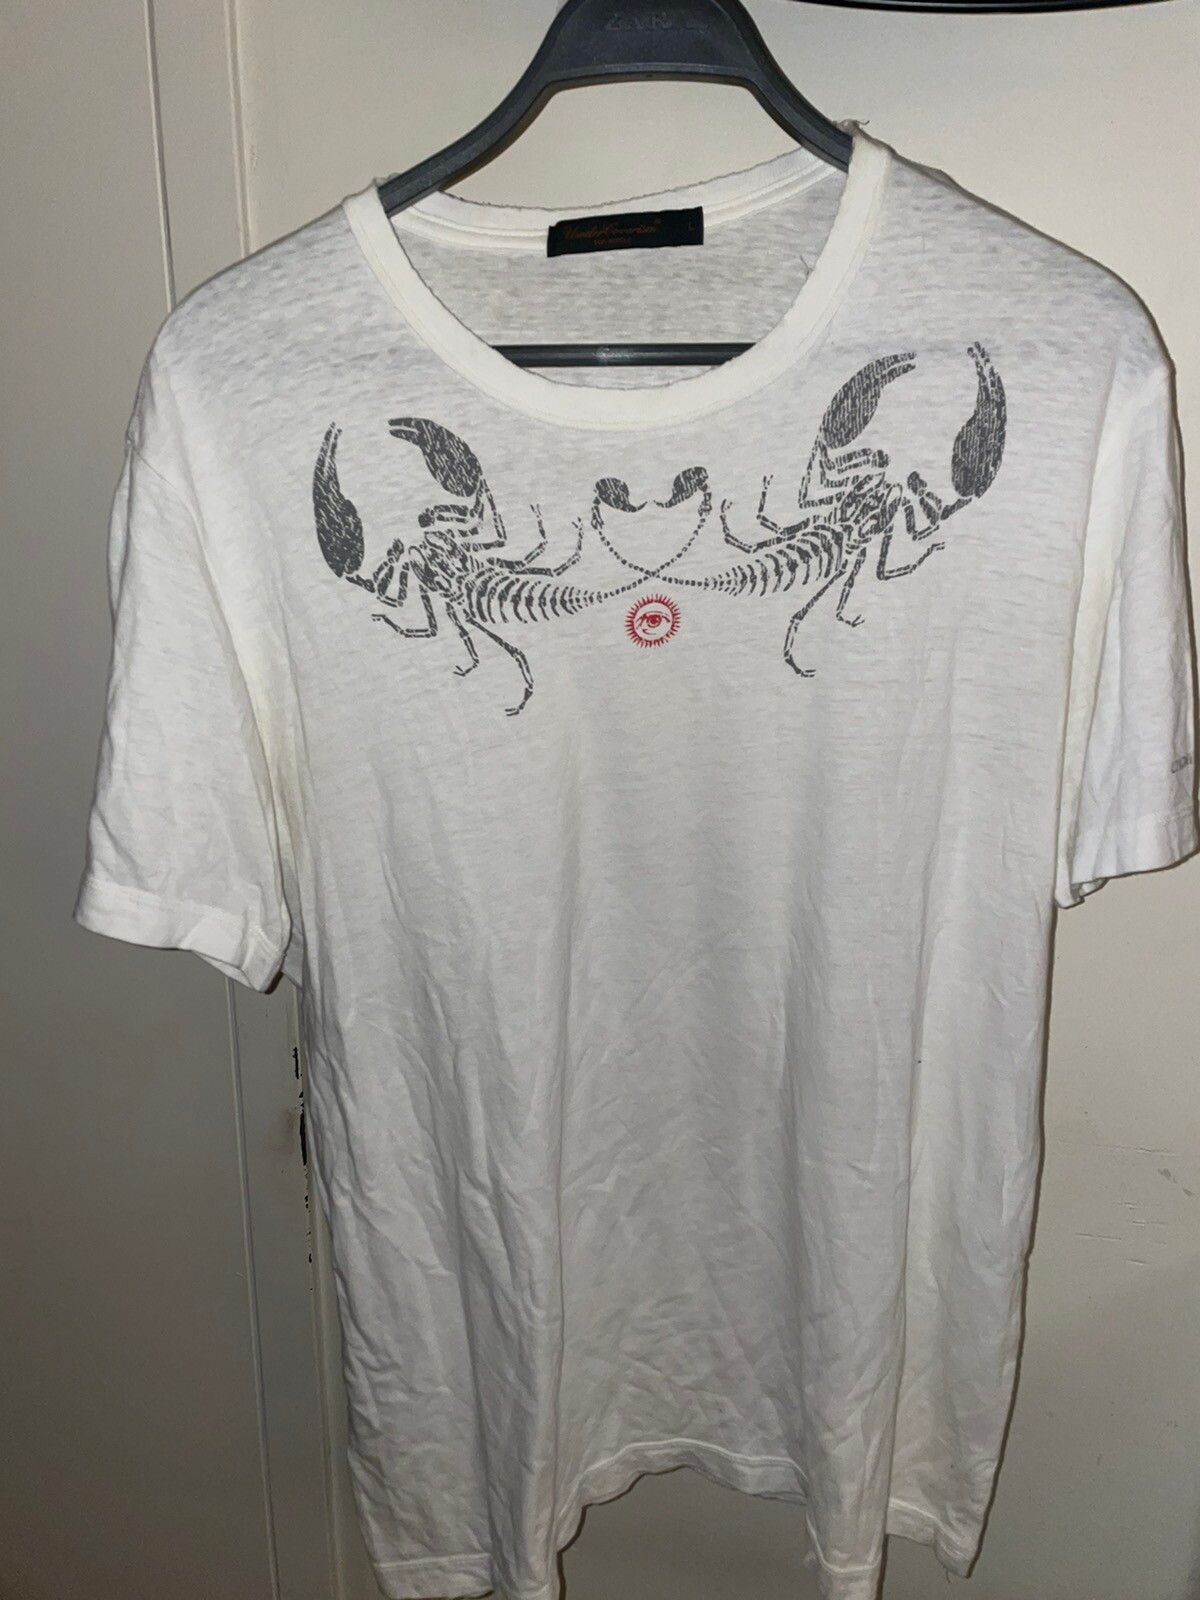 Undercover Undercover Scab SS03 Scorpion Graphic Tee Size US L / EU 52-54 / 3 - 1 Preview